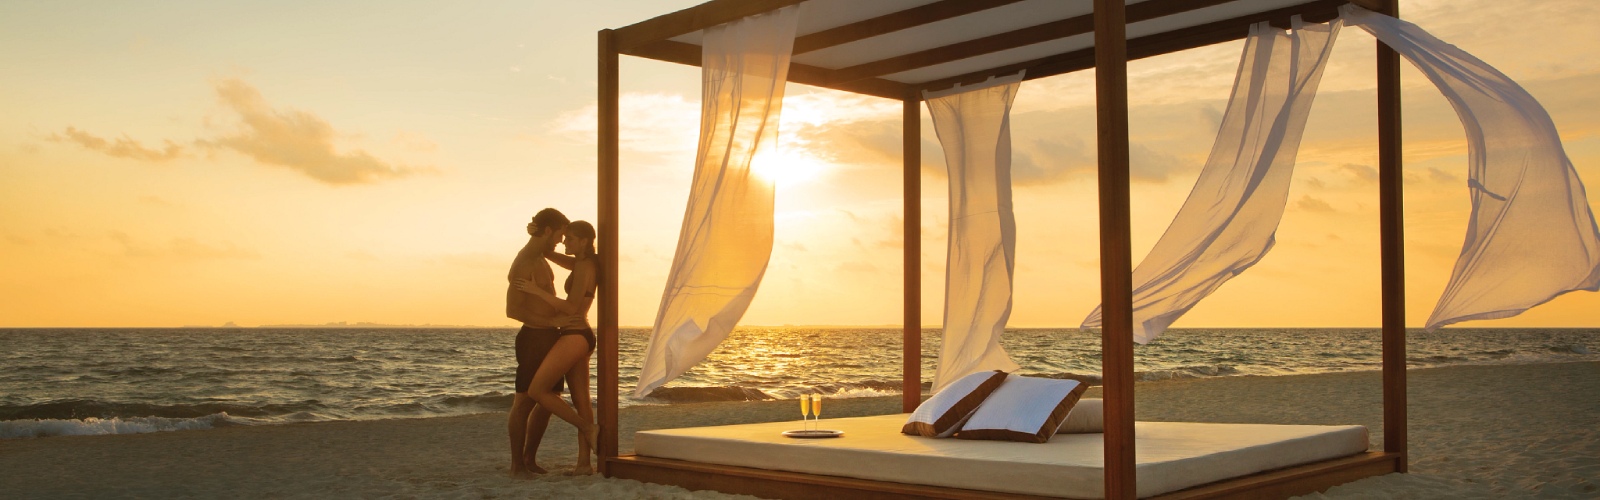 Couple embracing by beach bed